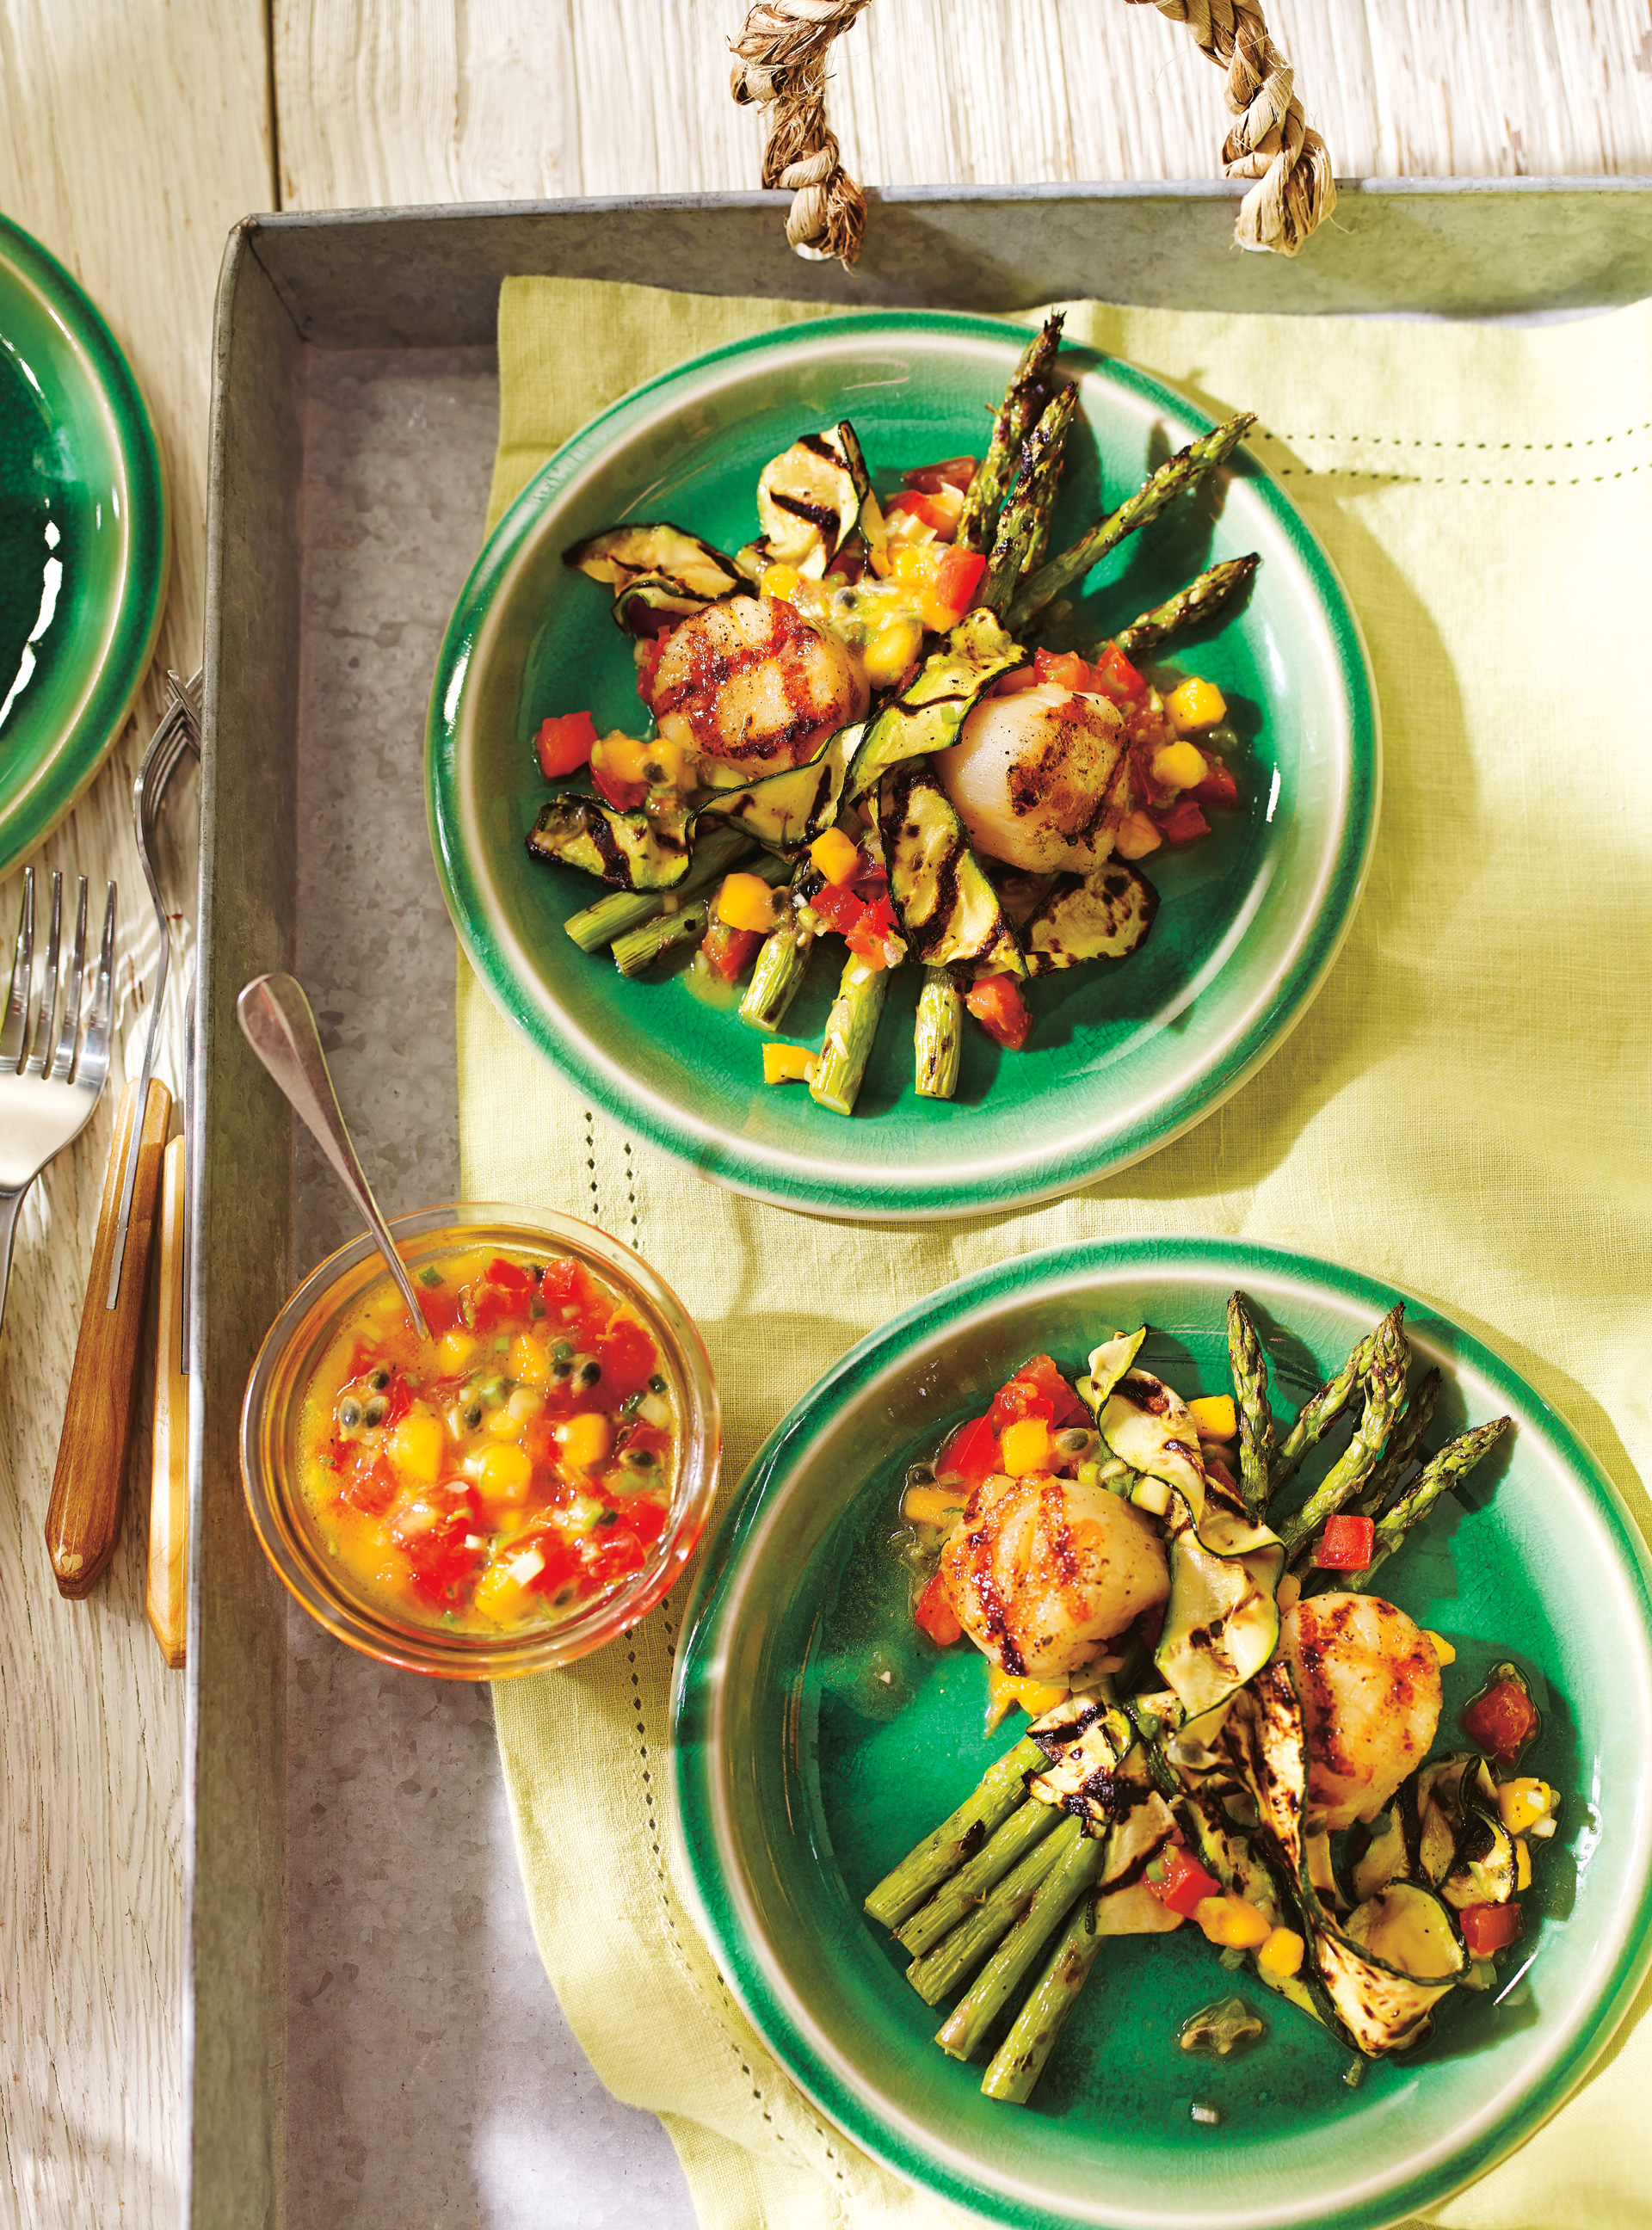 Grilled Scallops and Vegetables with Mango-Passion Fruit Salsa